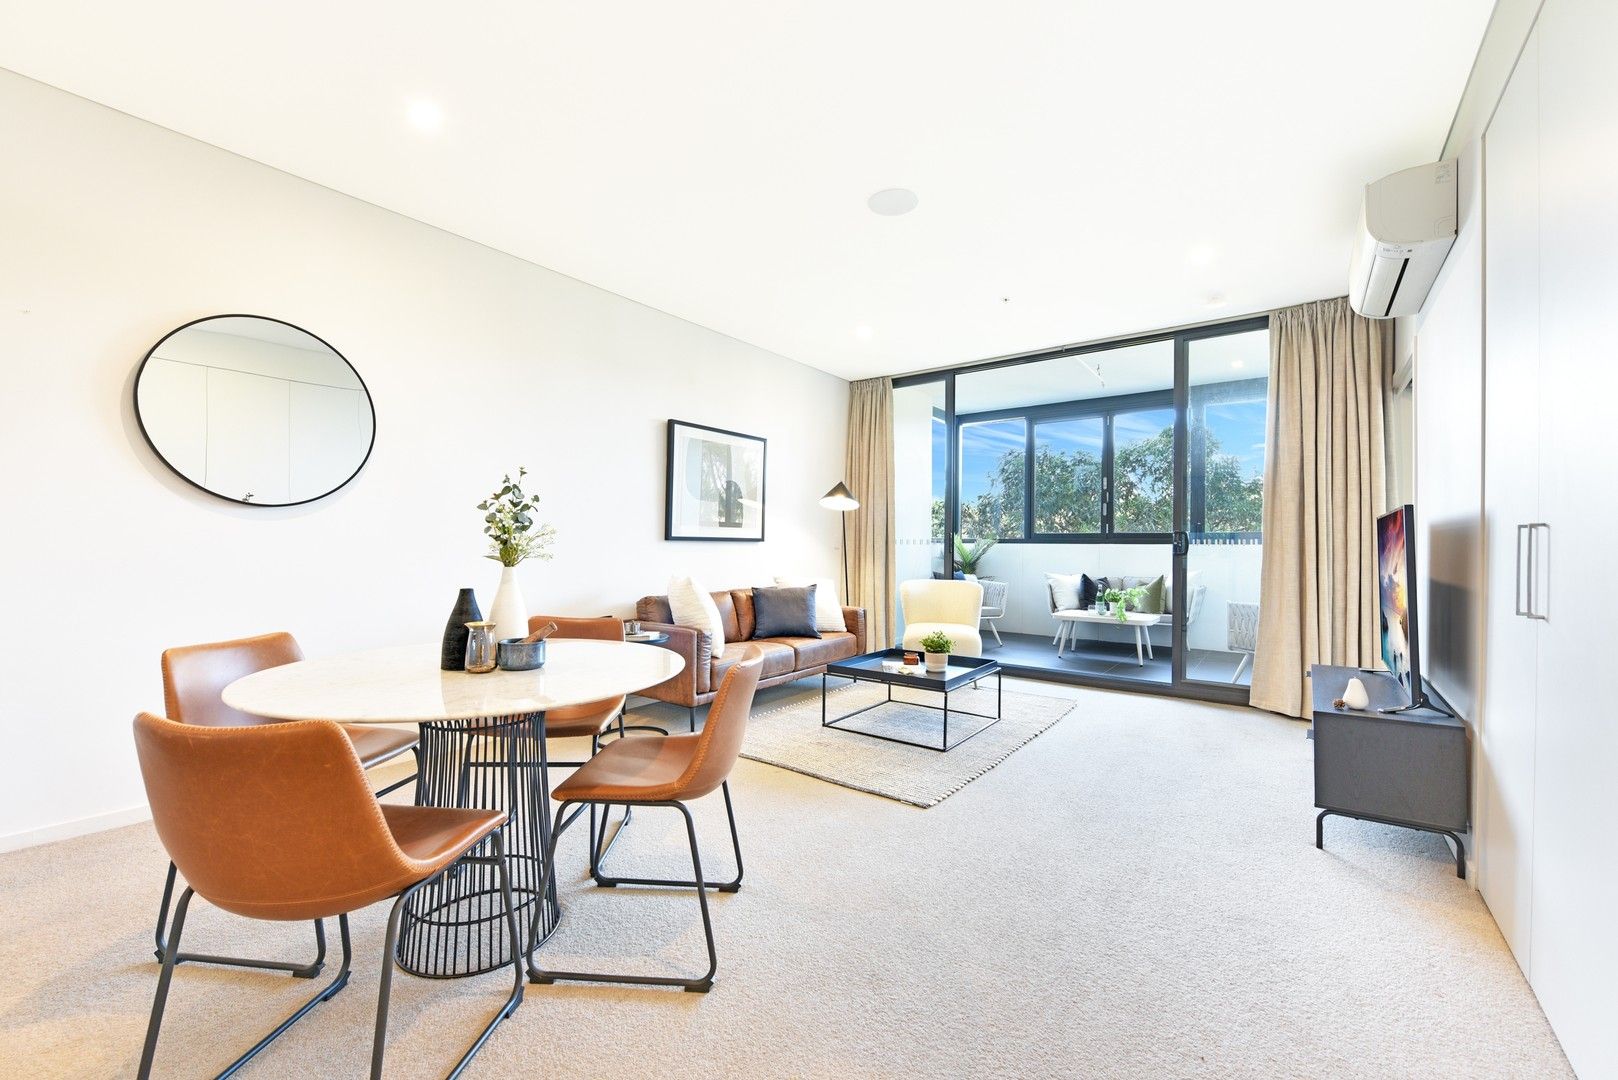 2 bedrooms Apartment / Unit / Flat in 8092/5 Bennelong Parkway WENTWORTH POINT NSW, 2127